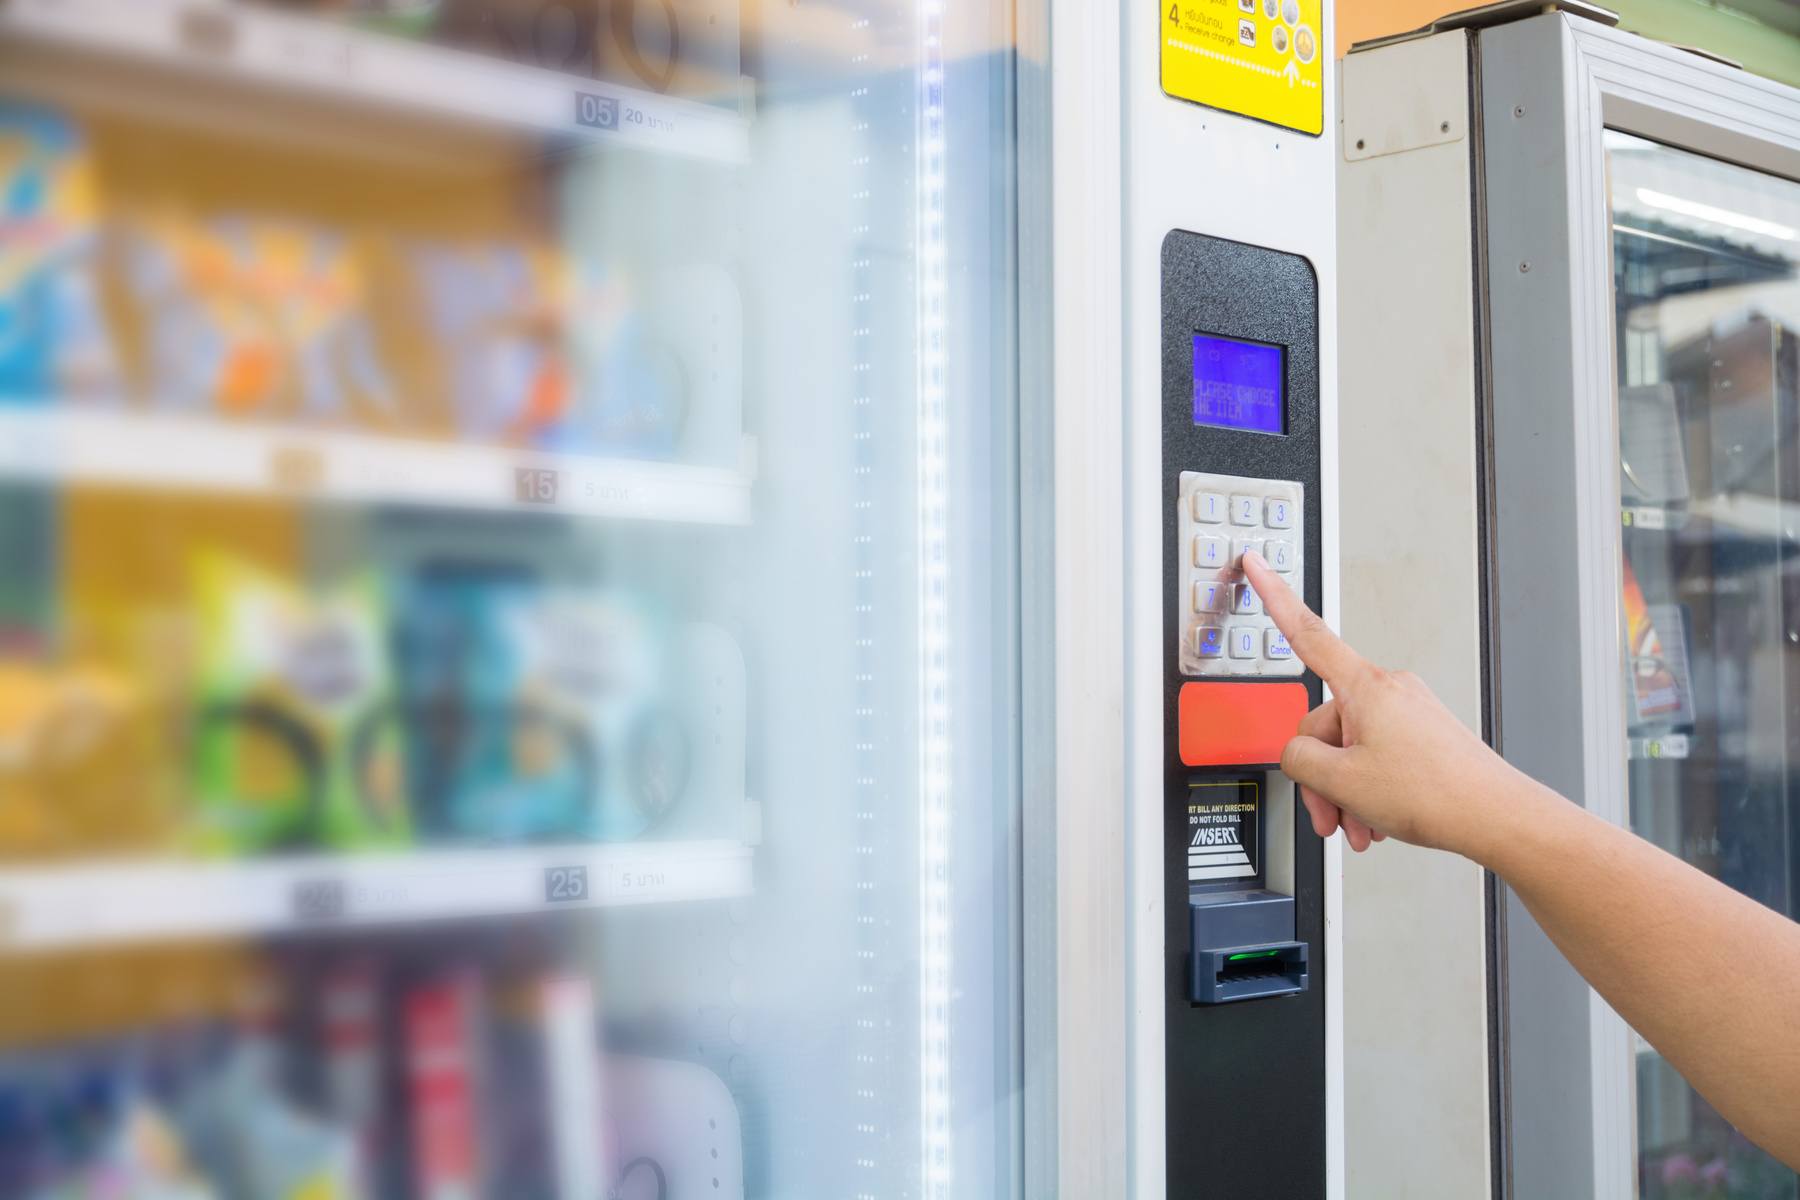 Shaking the Vending Machine: Becoming a Trusted Advisor